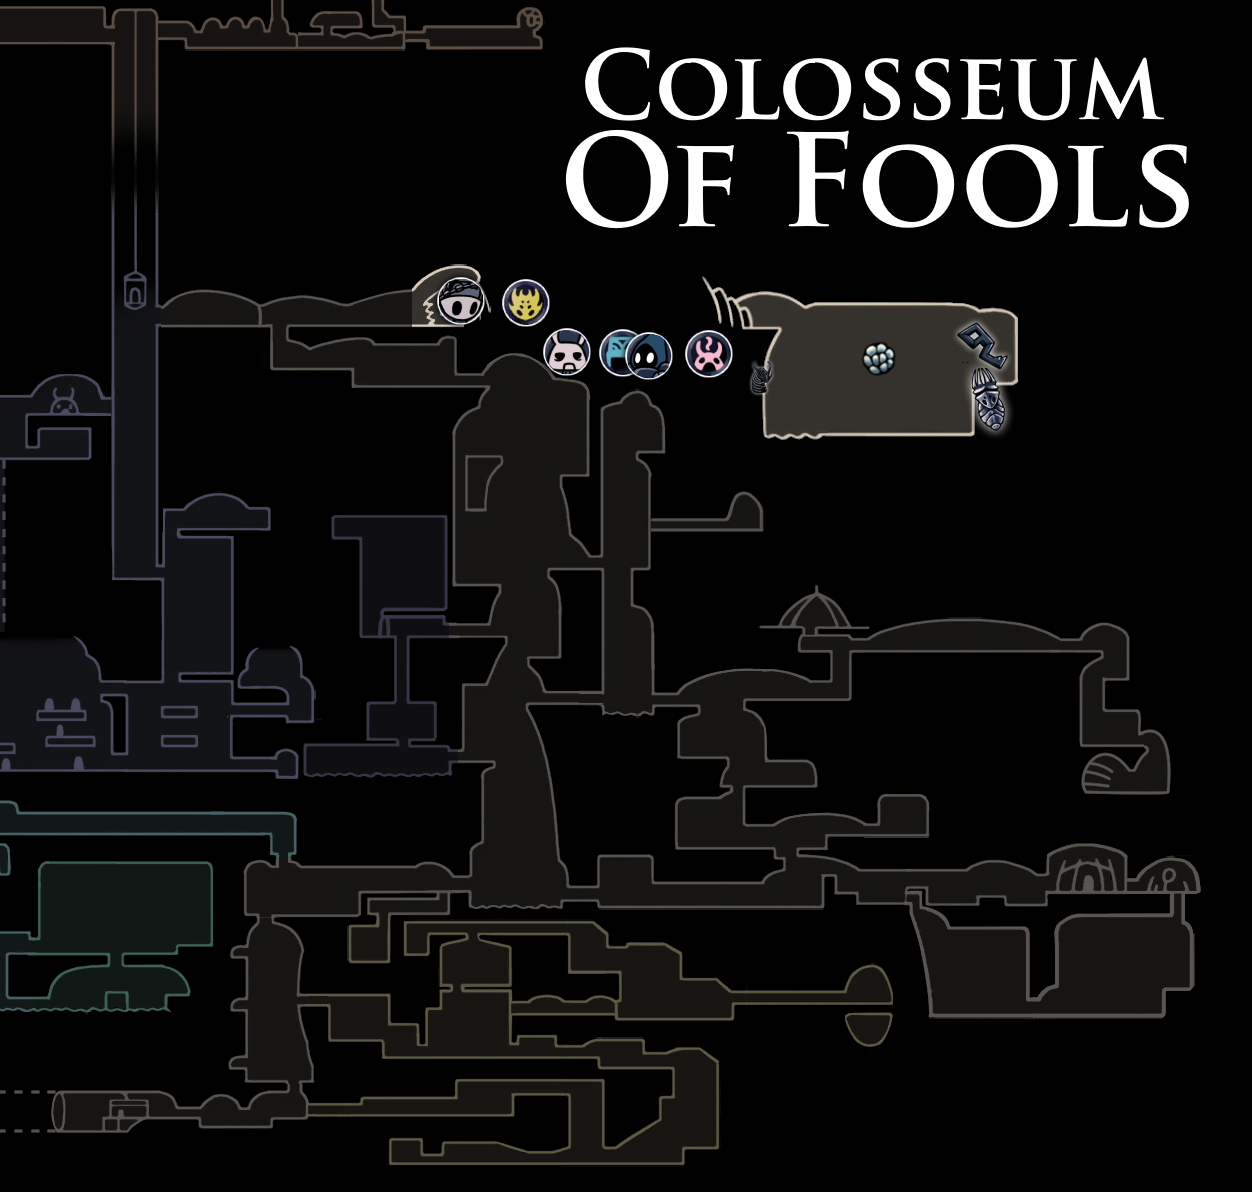 Colosseum of Fools | Hollow Knight Wiki | FANDOM powered by Wikia